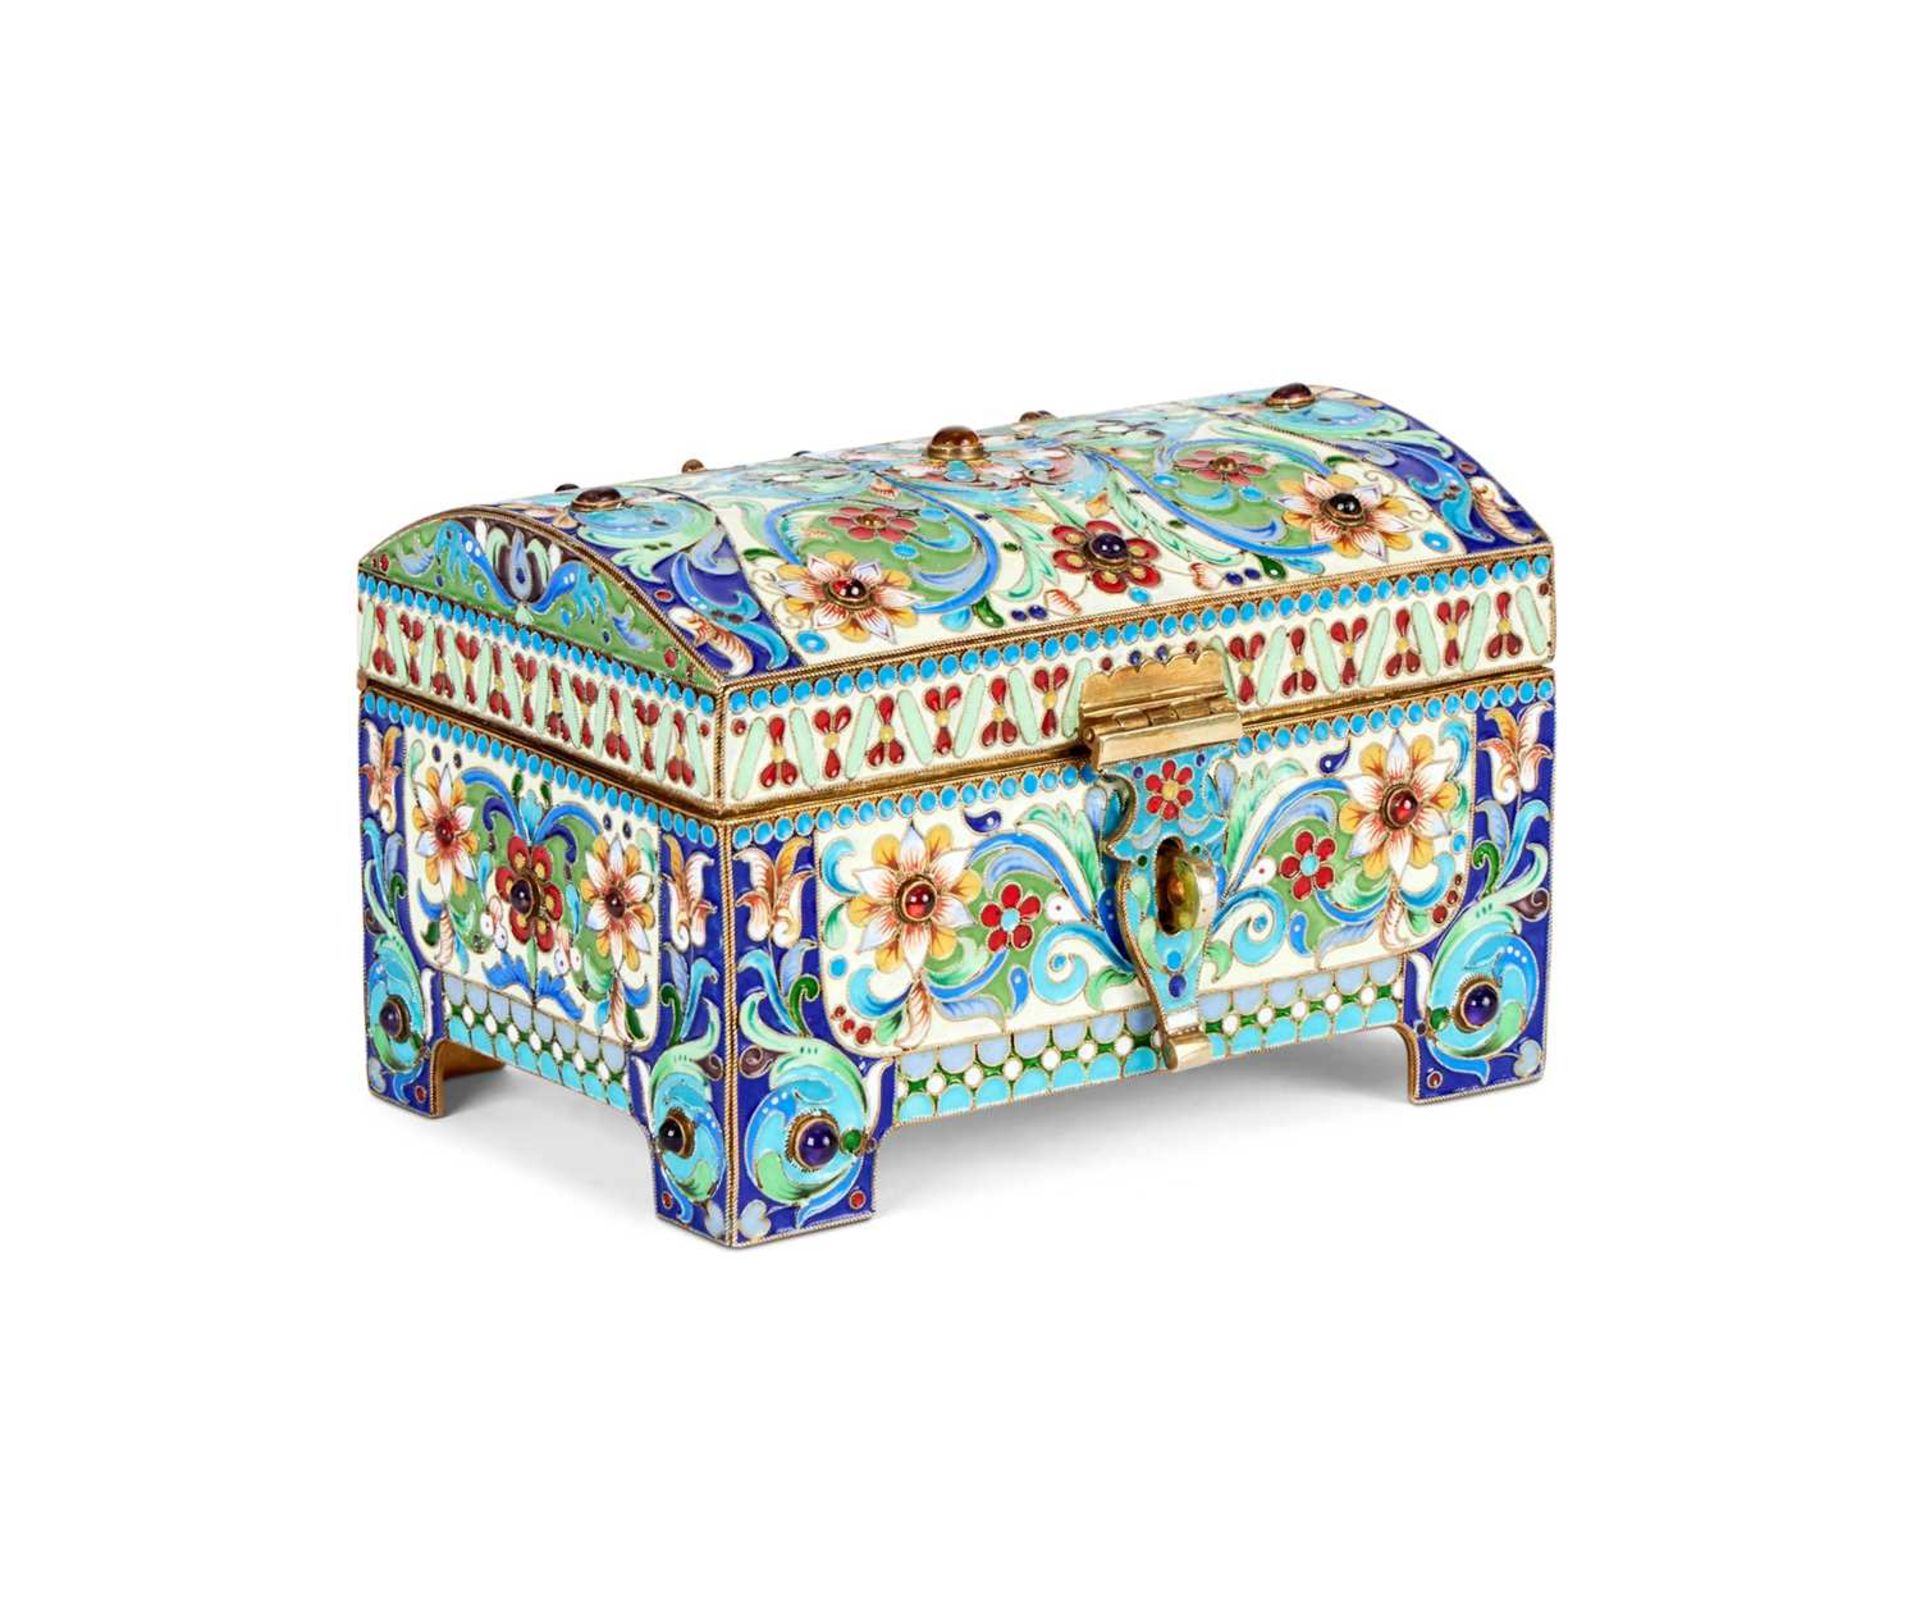 A SILVER GILT, CLOISONNE ENAMEL AND JEWELLED RUSSIAN STYLE CASKET